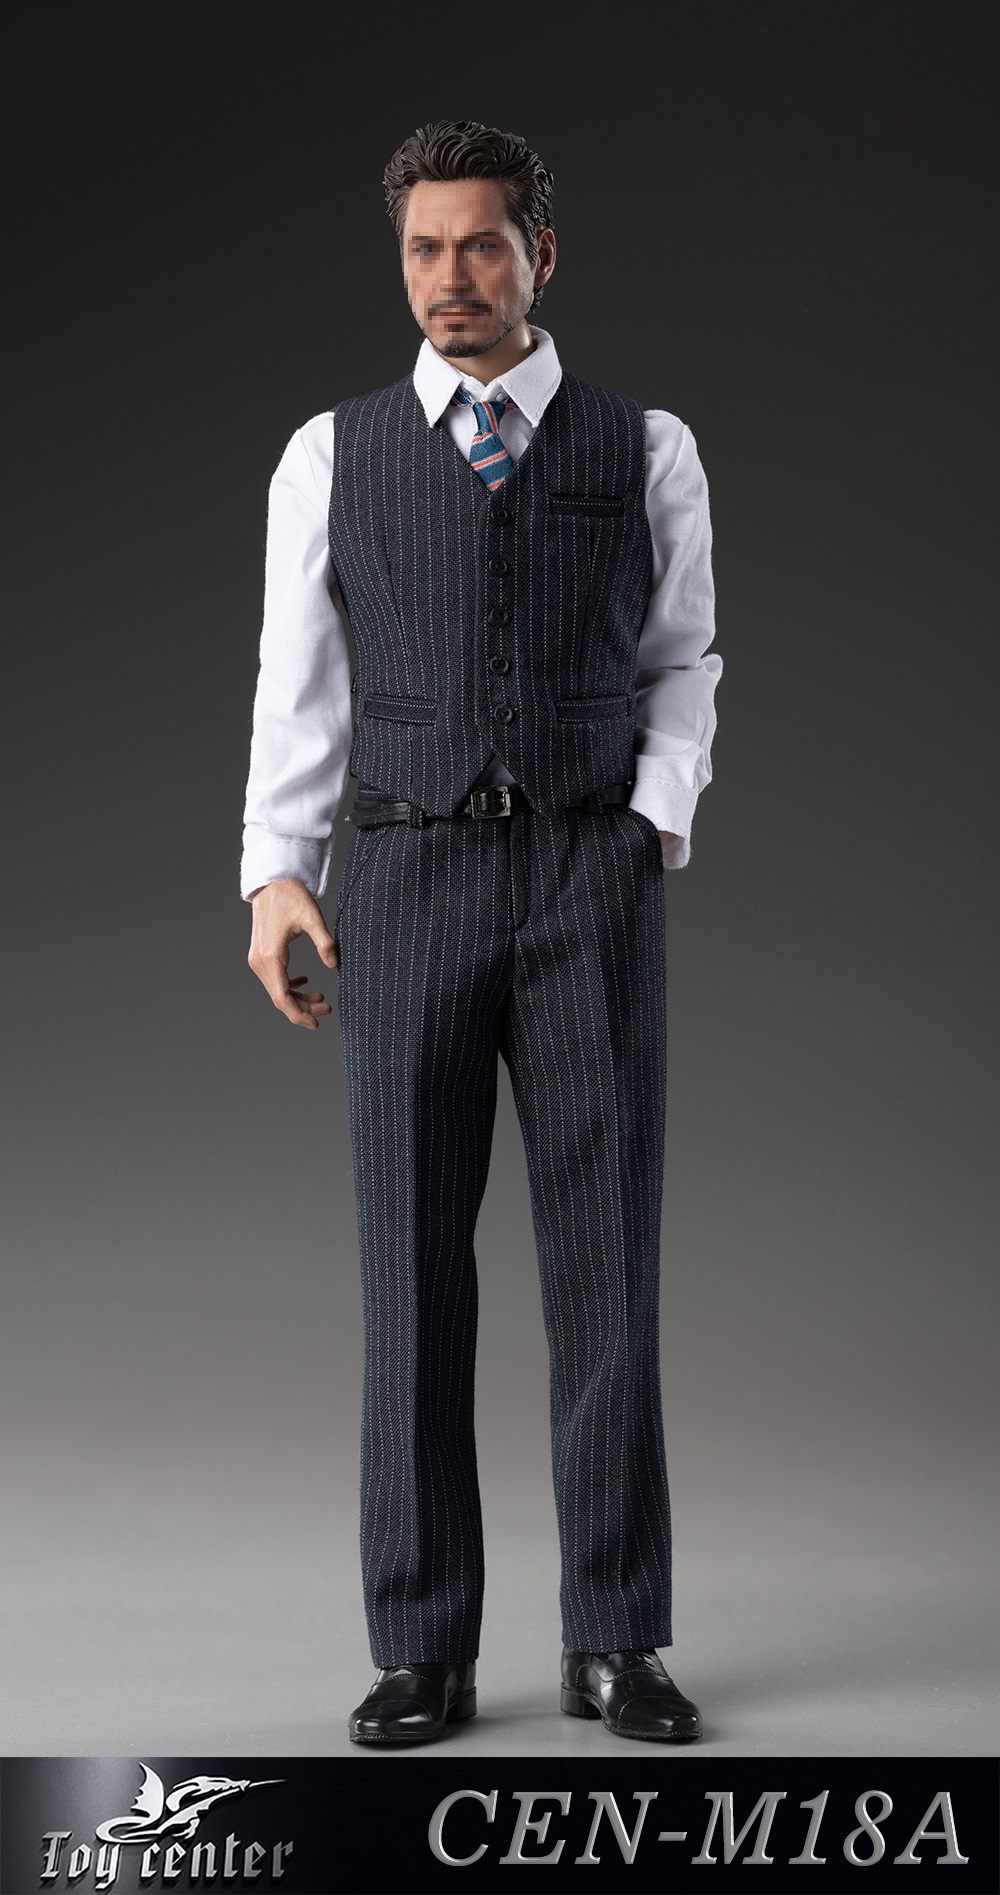 ToyCenter - NEW PRODUCT: Toy center: 1/6 British Gentleman Tony Striped Suit CEN-M18 Three Colors 15522212